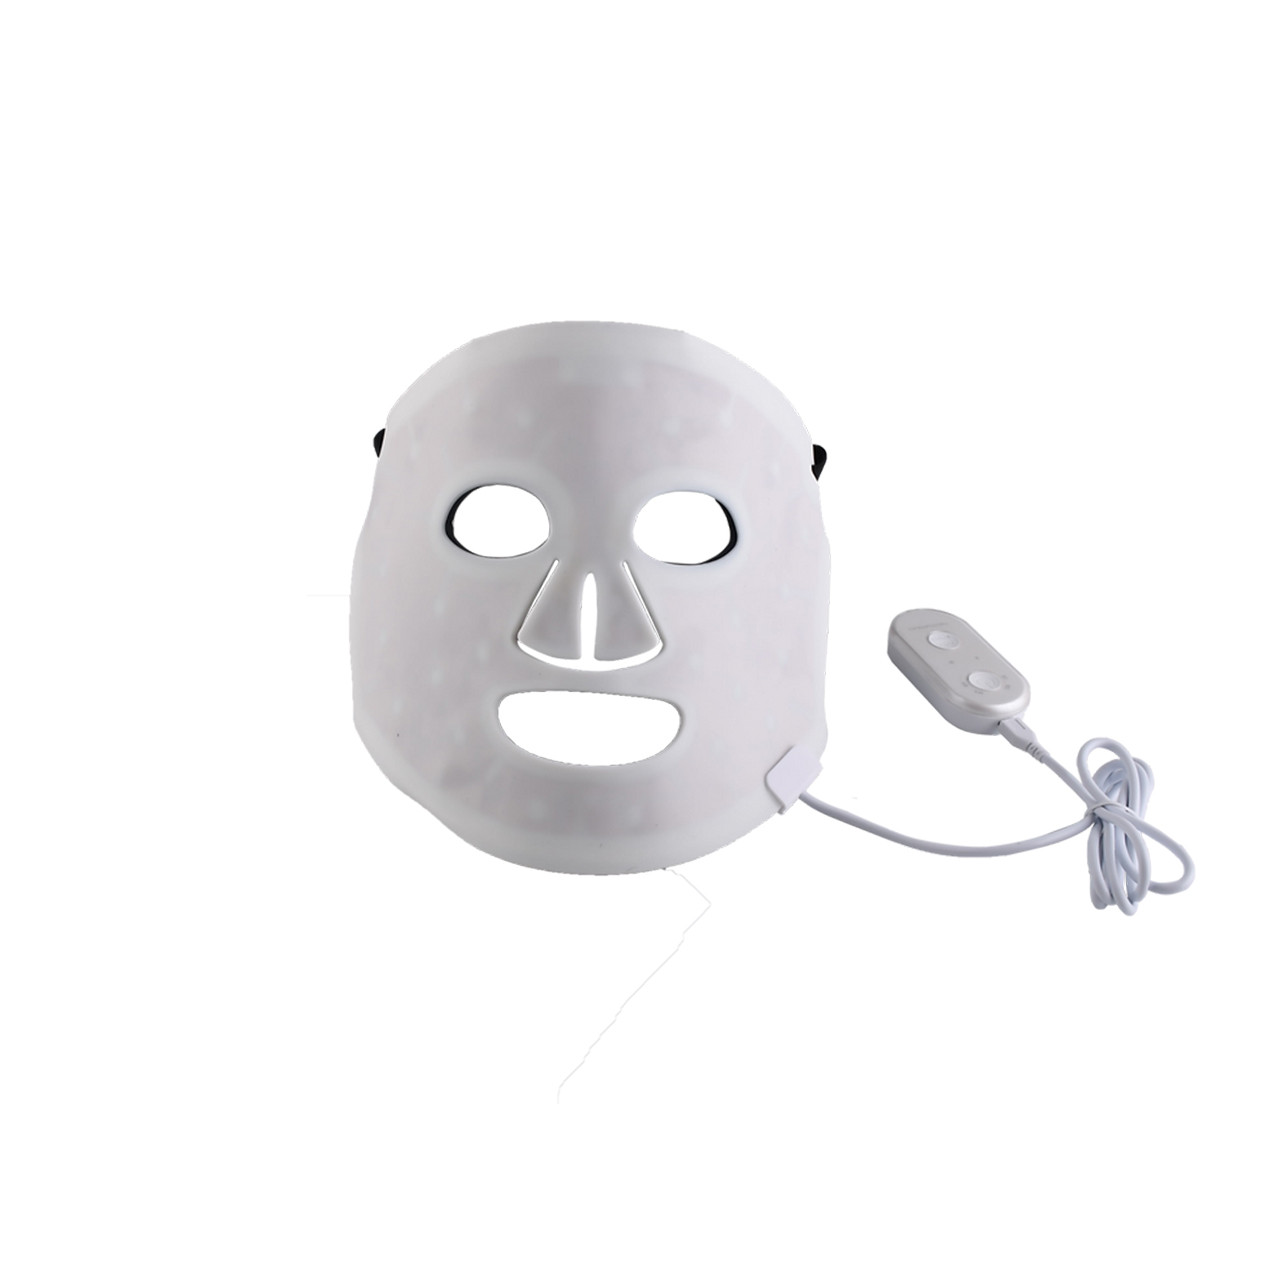 ZAQ Noor 2.0 LED Light Therapy Face Mask